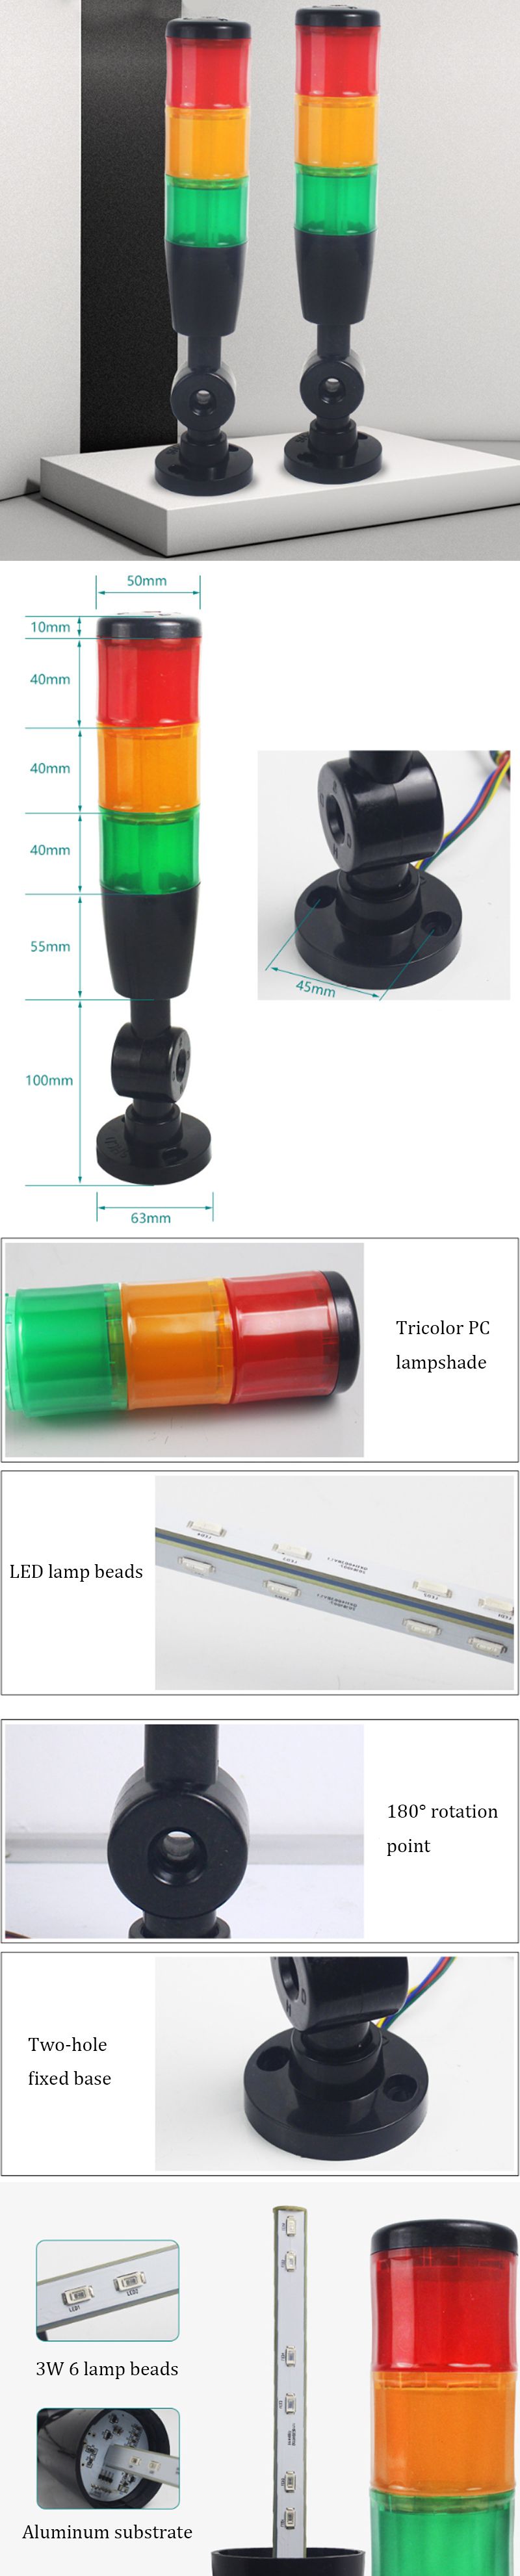 9W-Warning-Signal-Light-6-Lamp-Beads-3-Layers-Tower-Lights-Outdoor-Camping-Hunting-Rotate-LED-Emerge-1398815